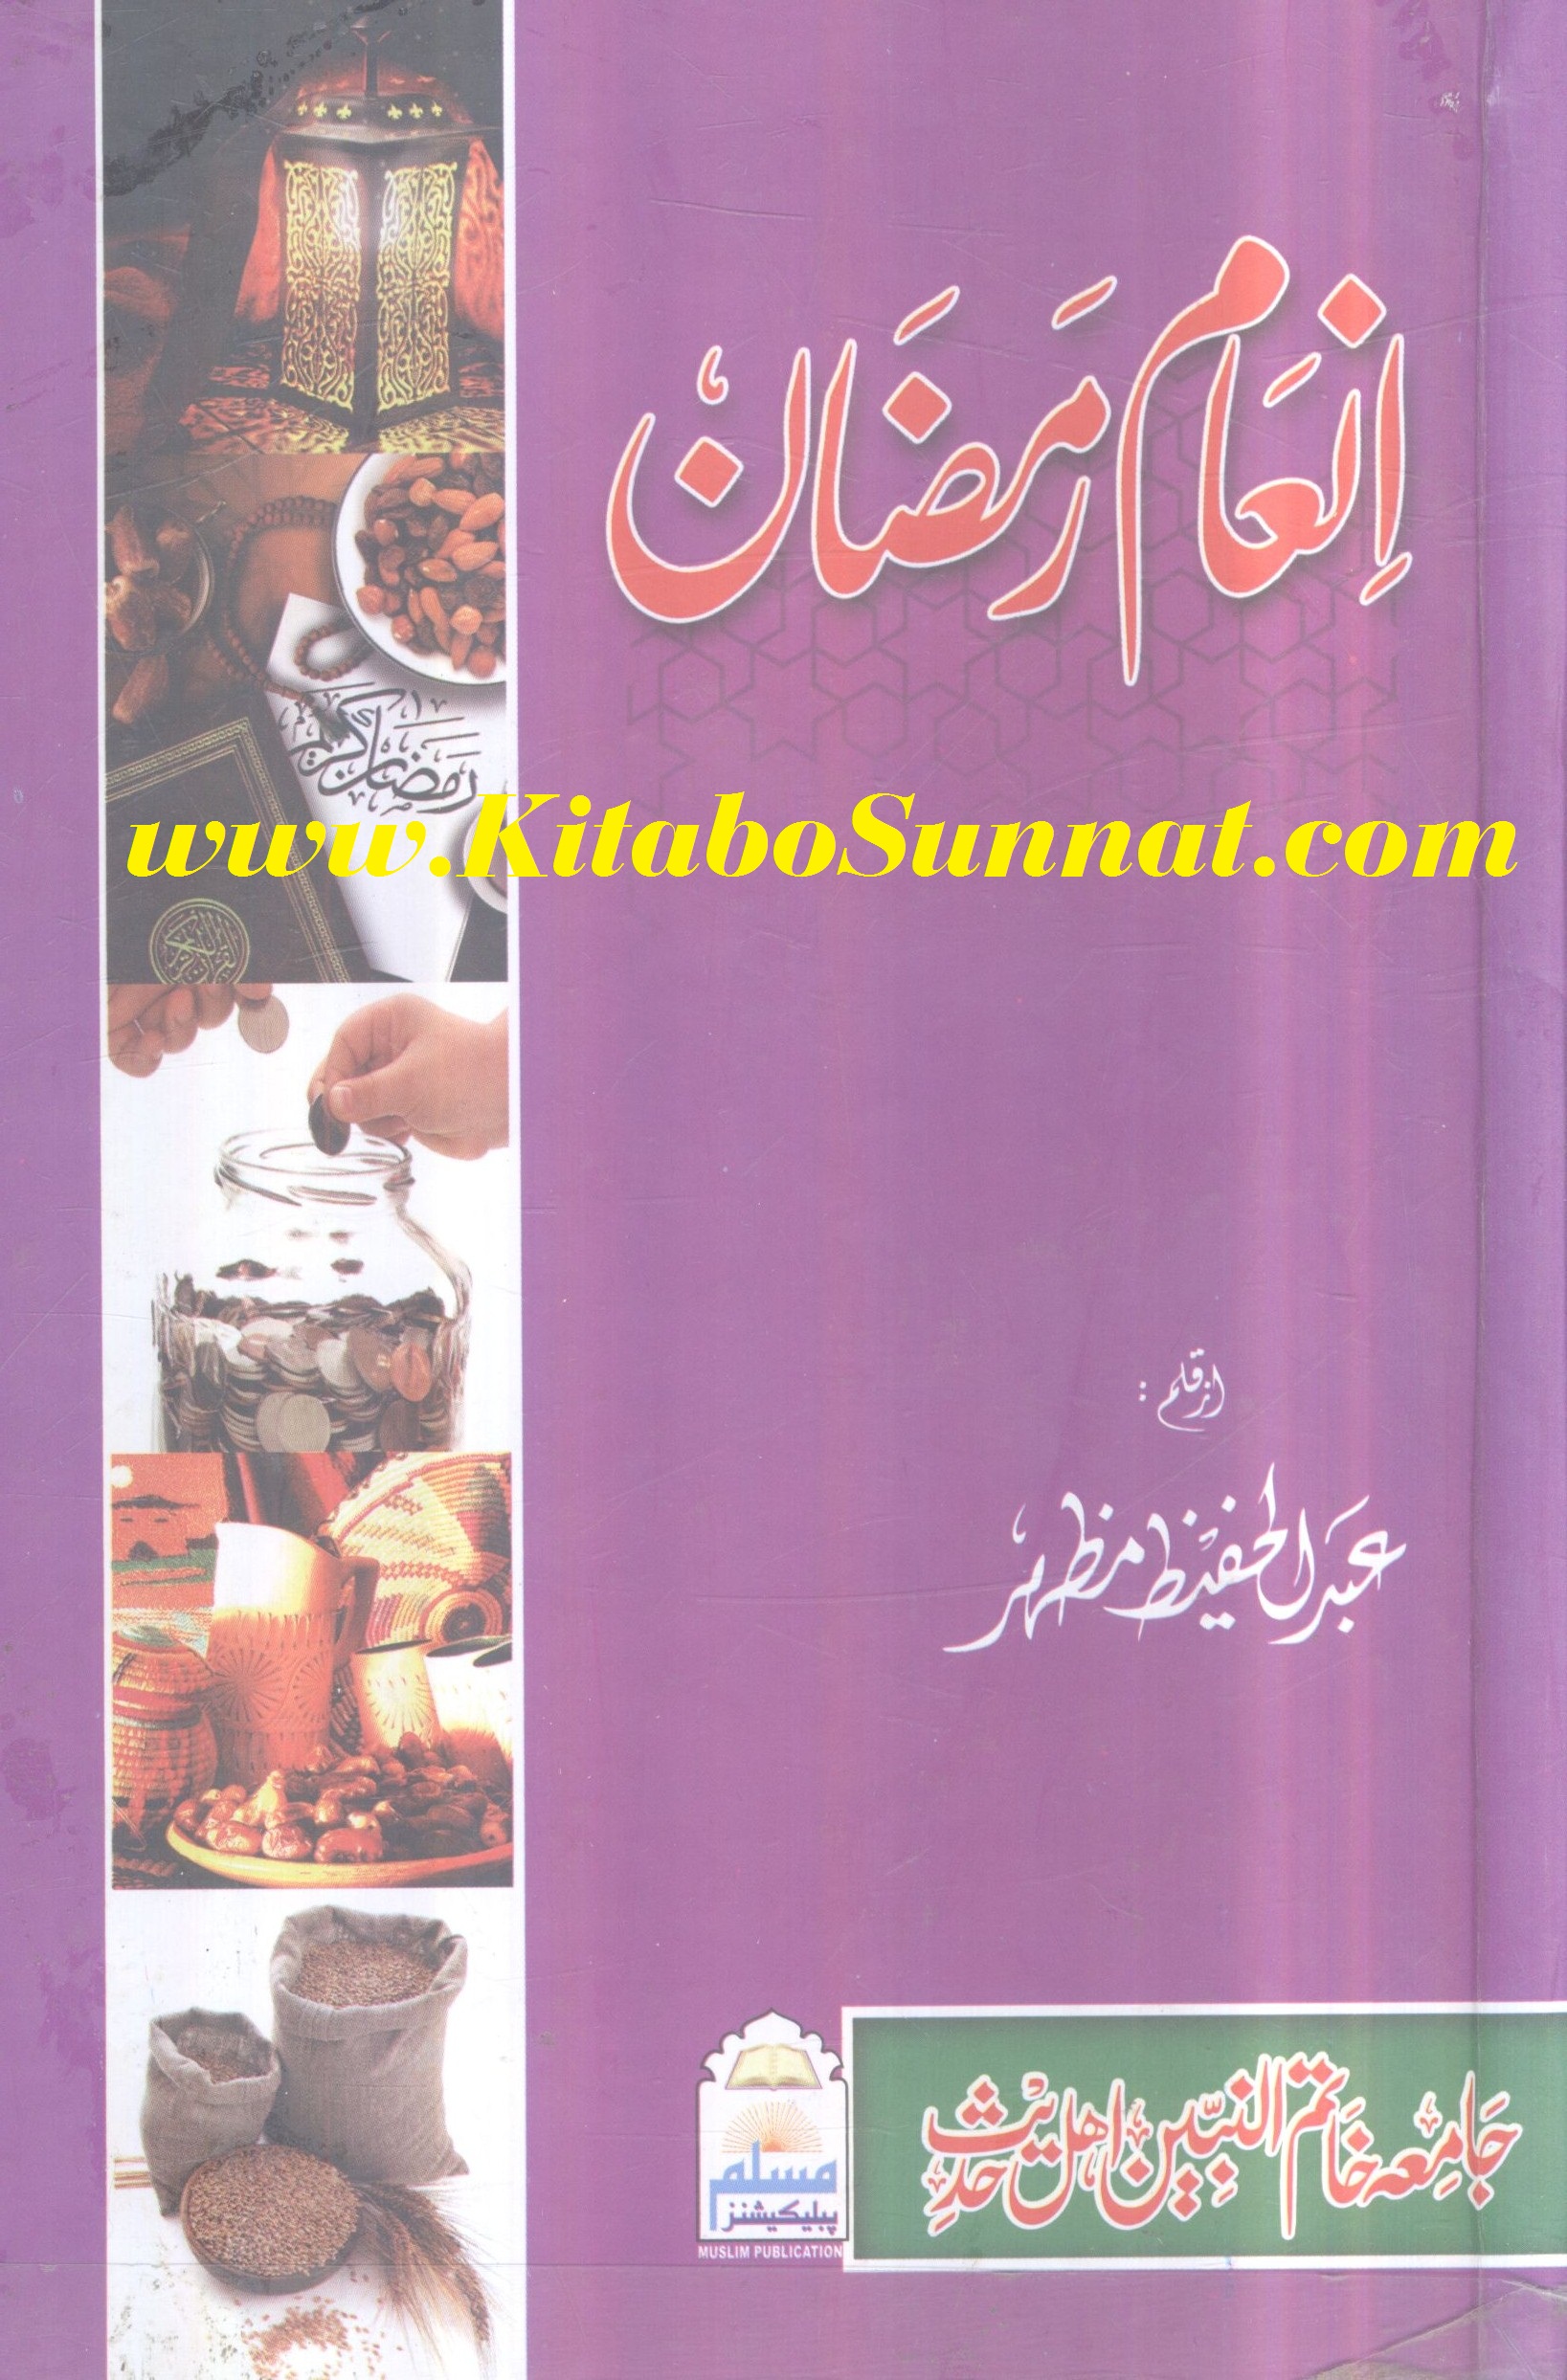 Title Pages --- Inam-e-Ramzan.jpg